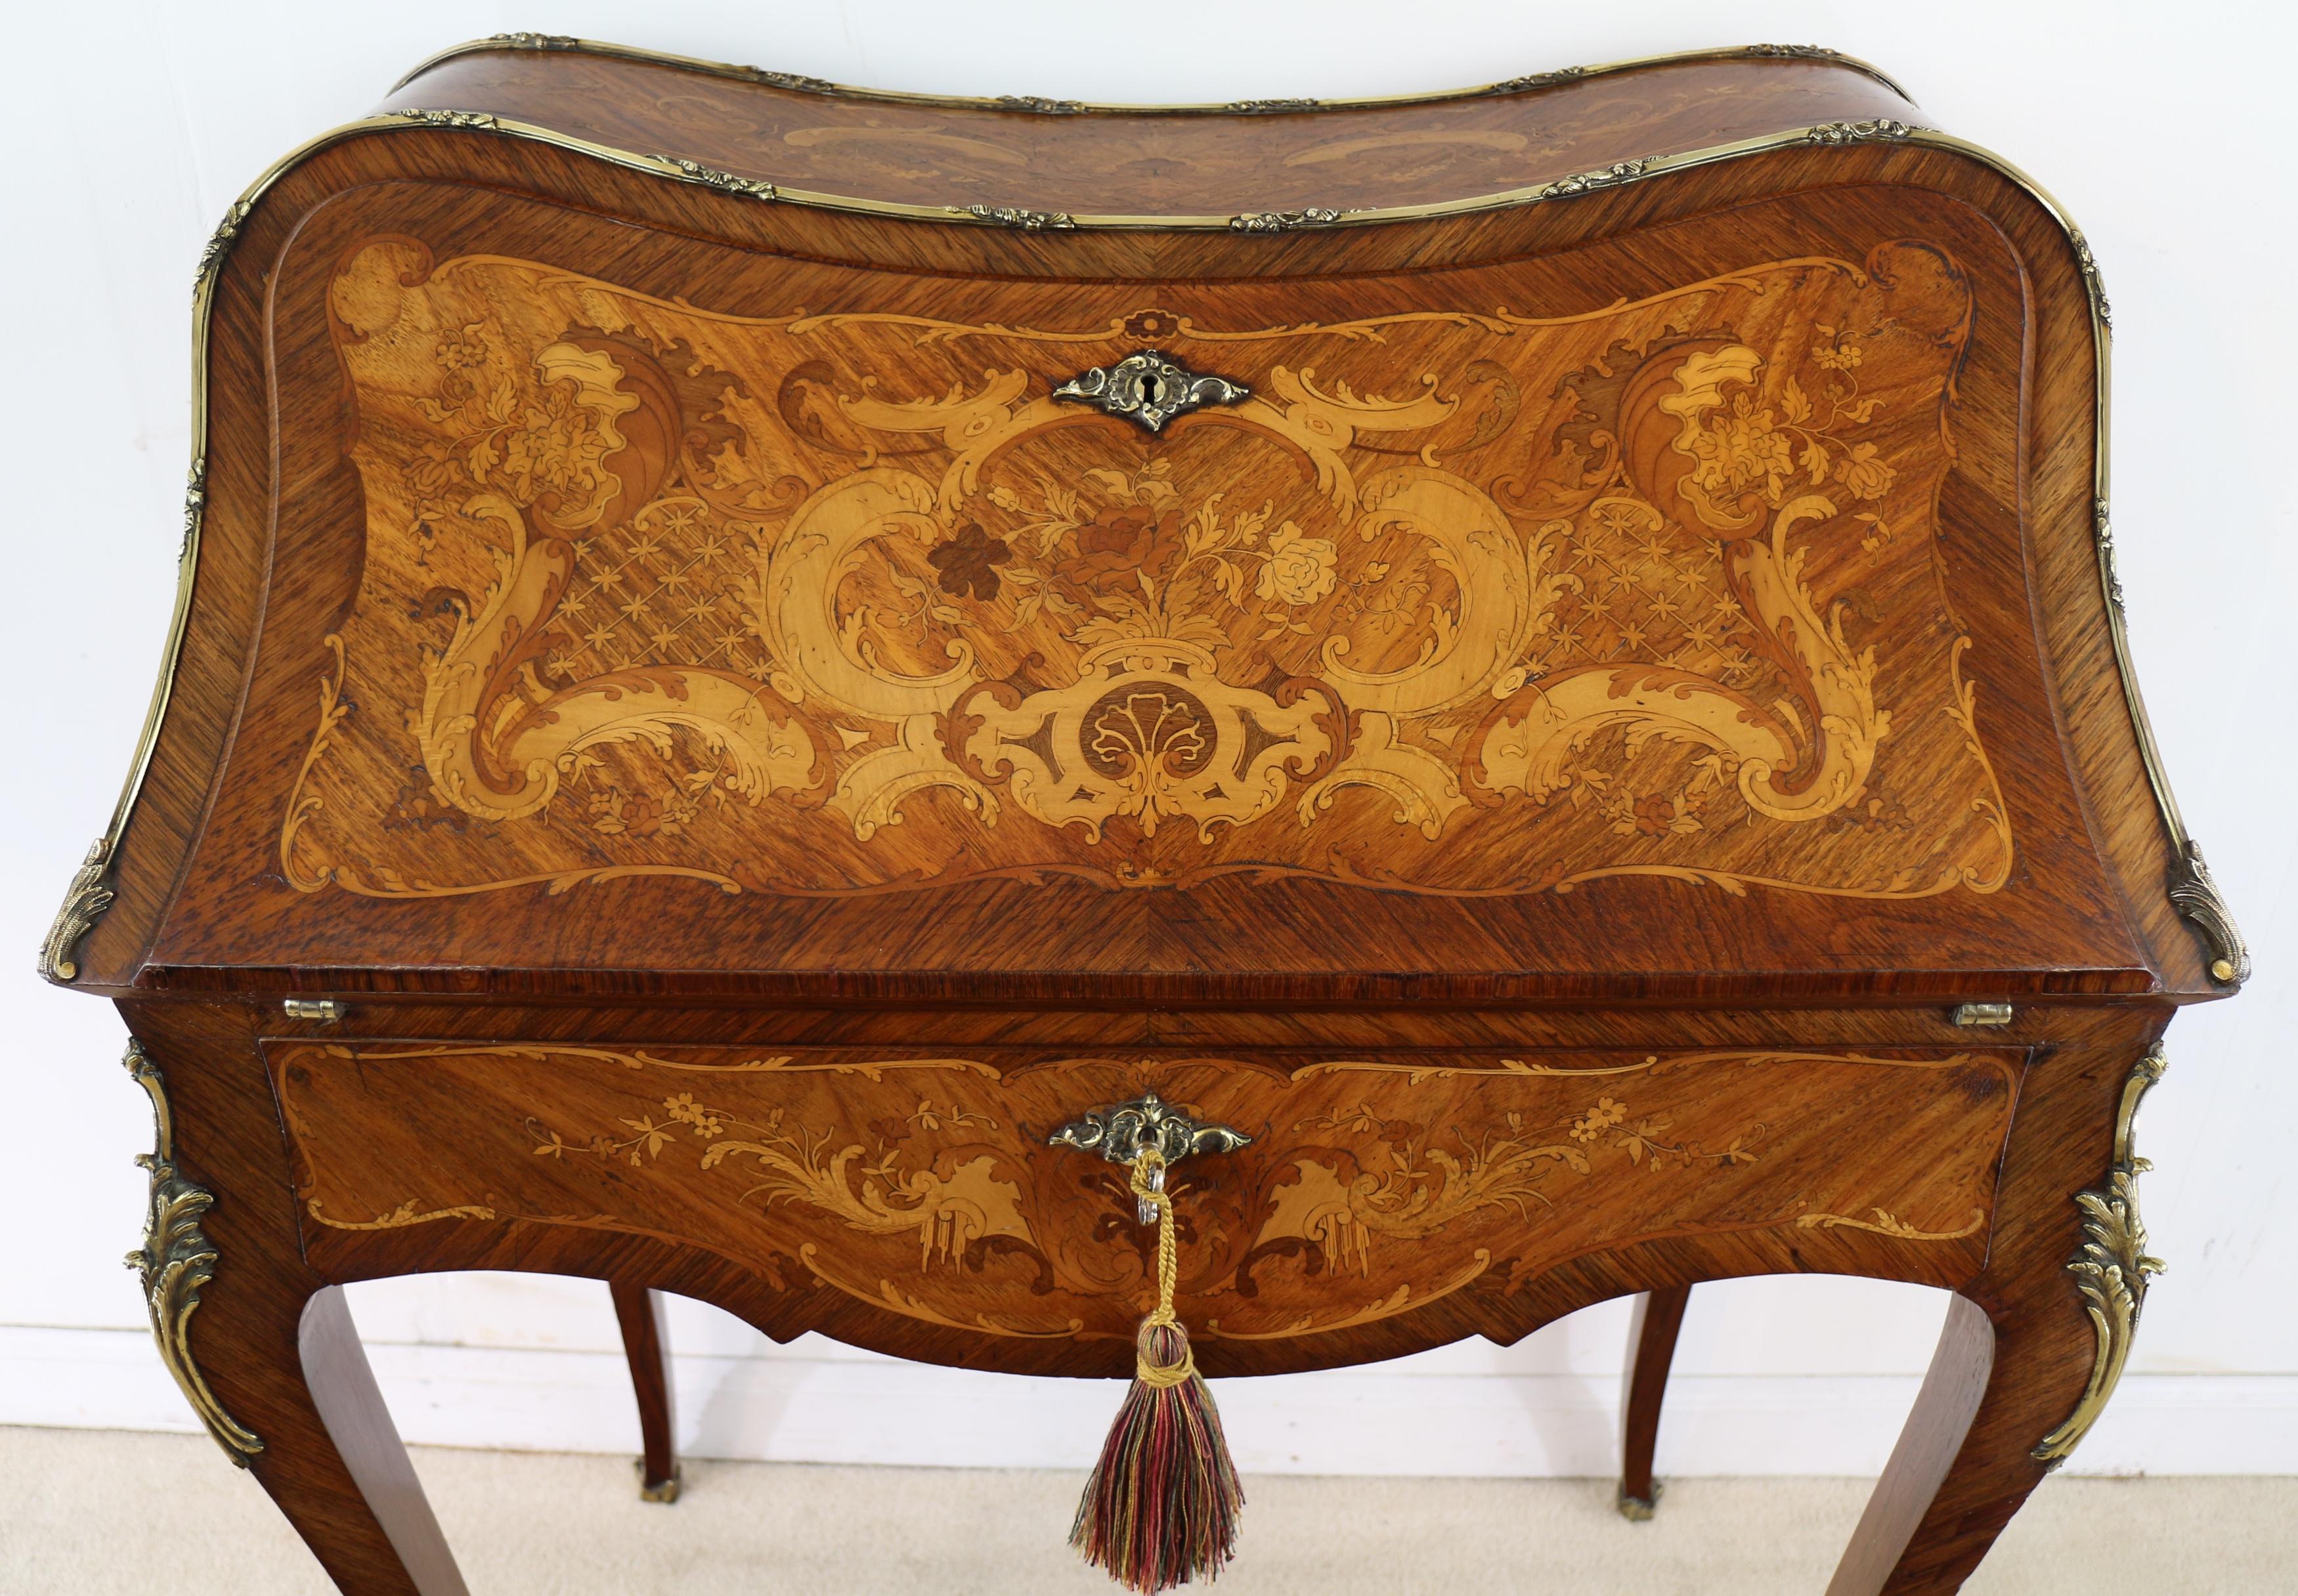 20th Century Antique French Louis XV Style Kingwood and Marquetry Bureau de Dame For Sale